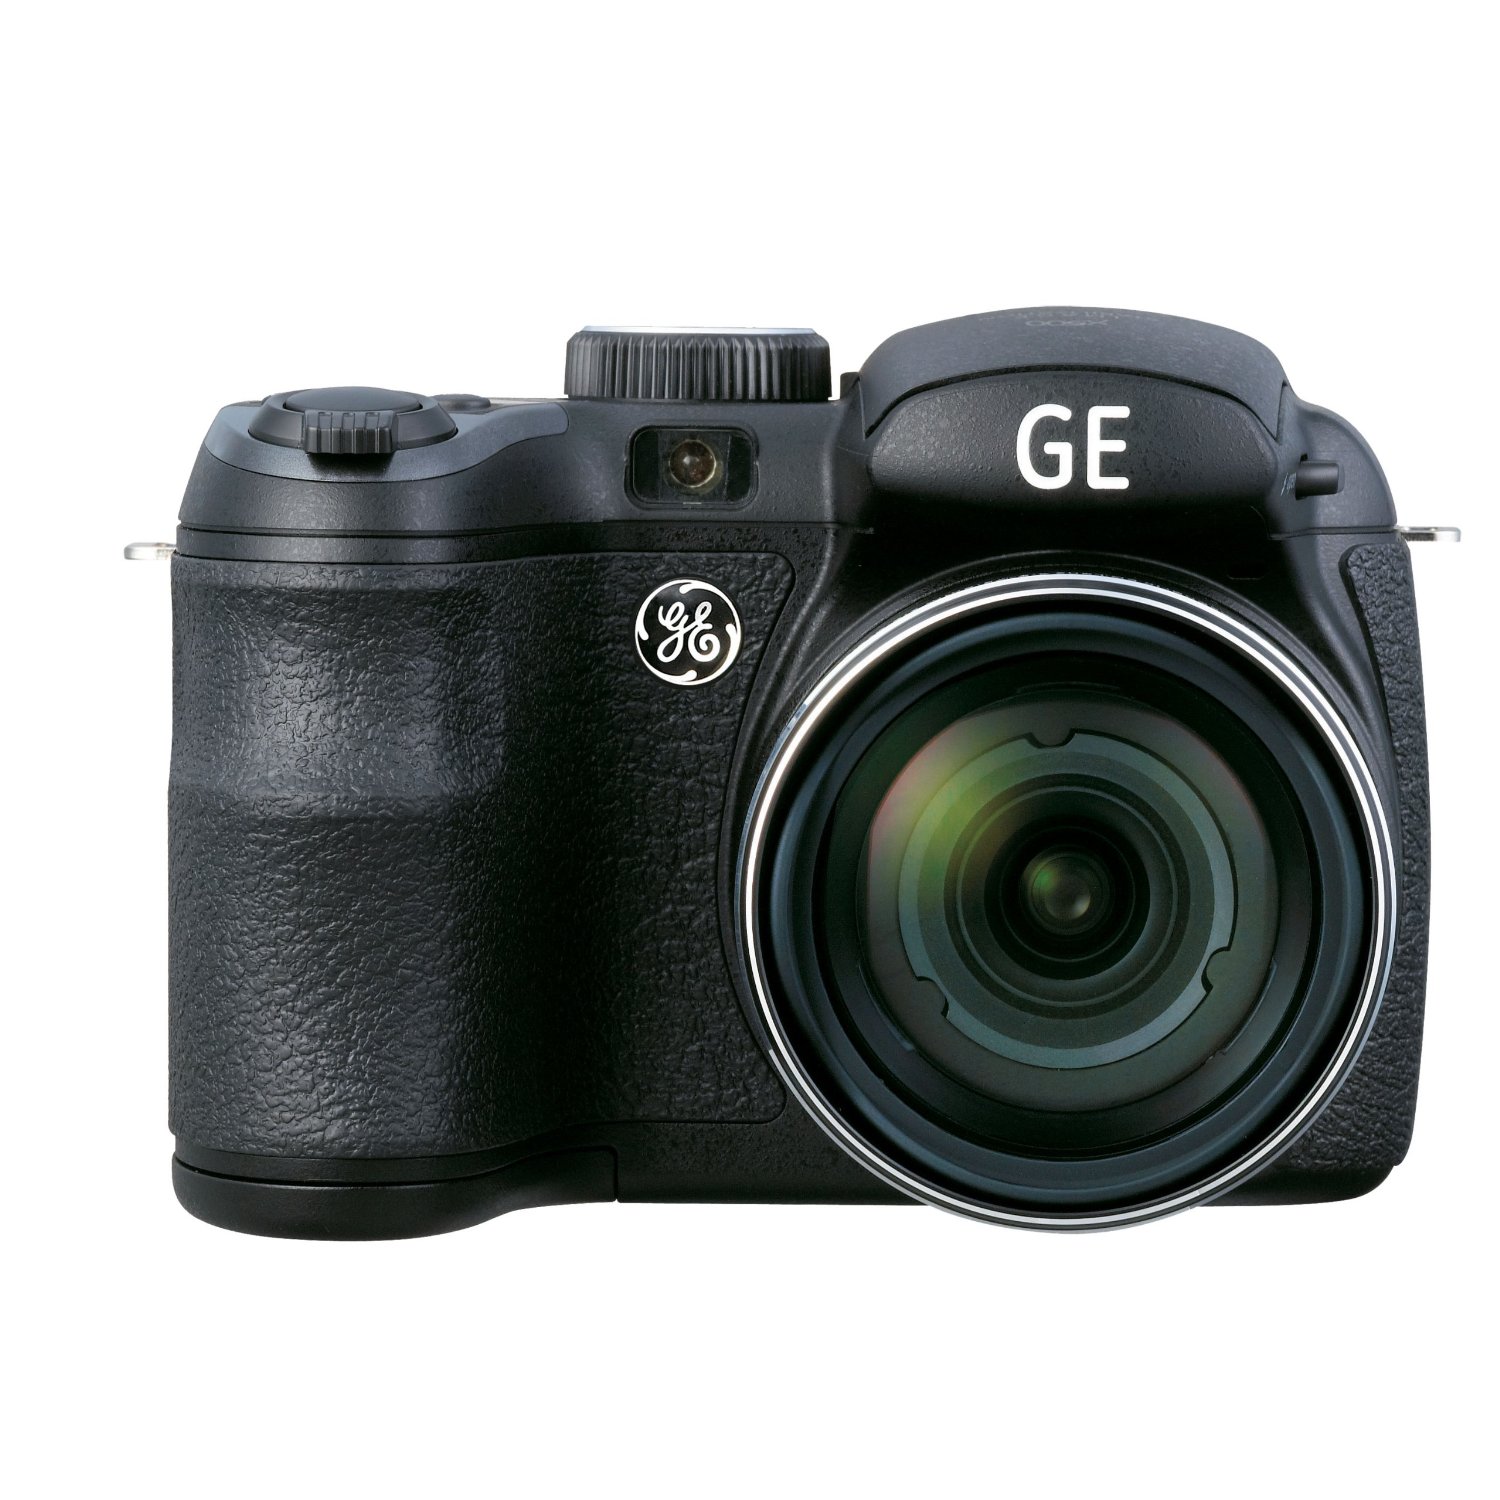 http://thetechjournal.com/wp-content/uploads/images/1203/1332339890-ge-power-pro-x500bk-16-mp-with-15-x-optical-zoom-digital-camera-5.jpg